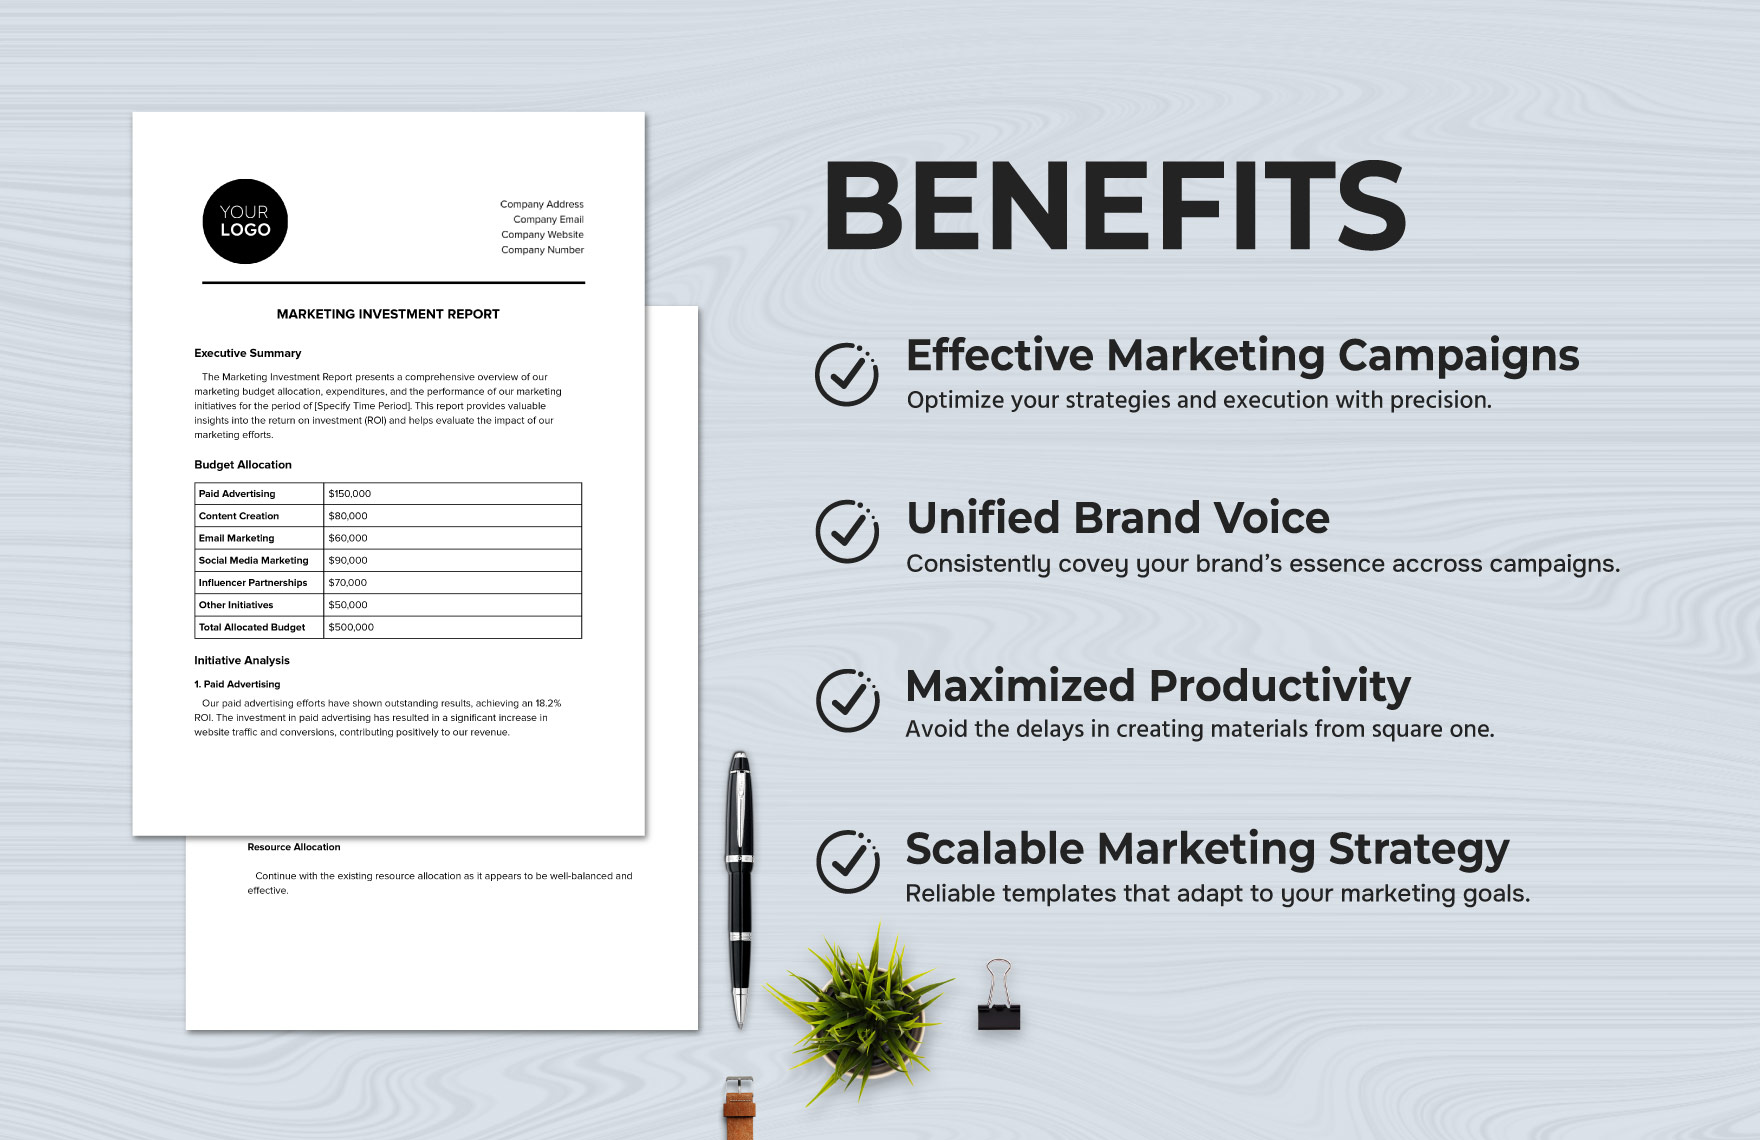 Marketing Investment Report Template